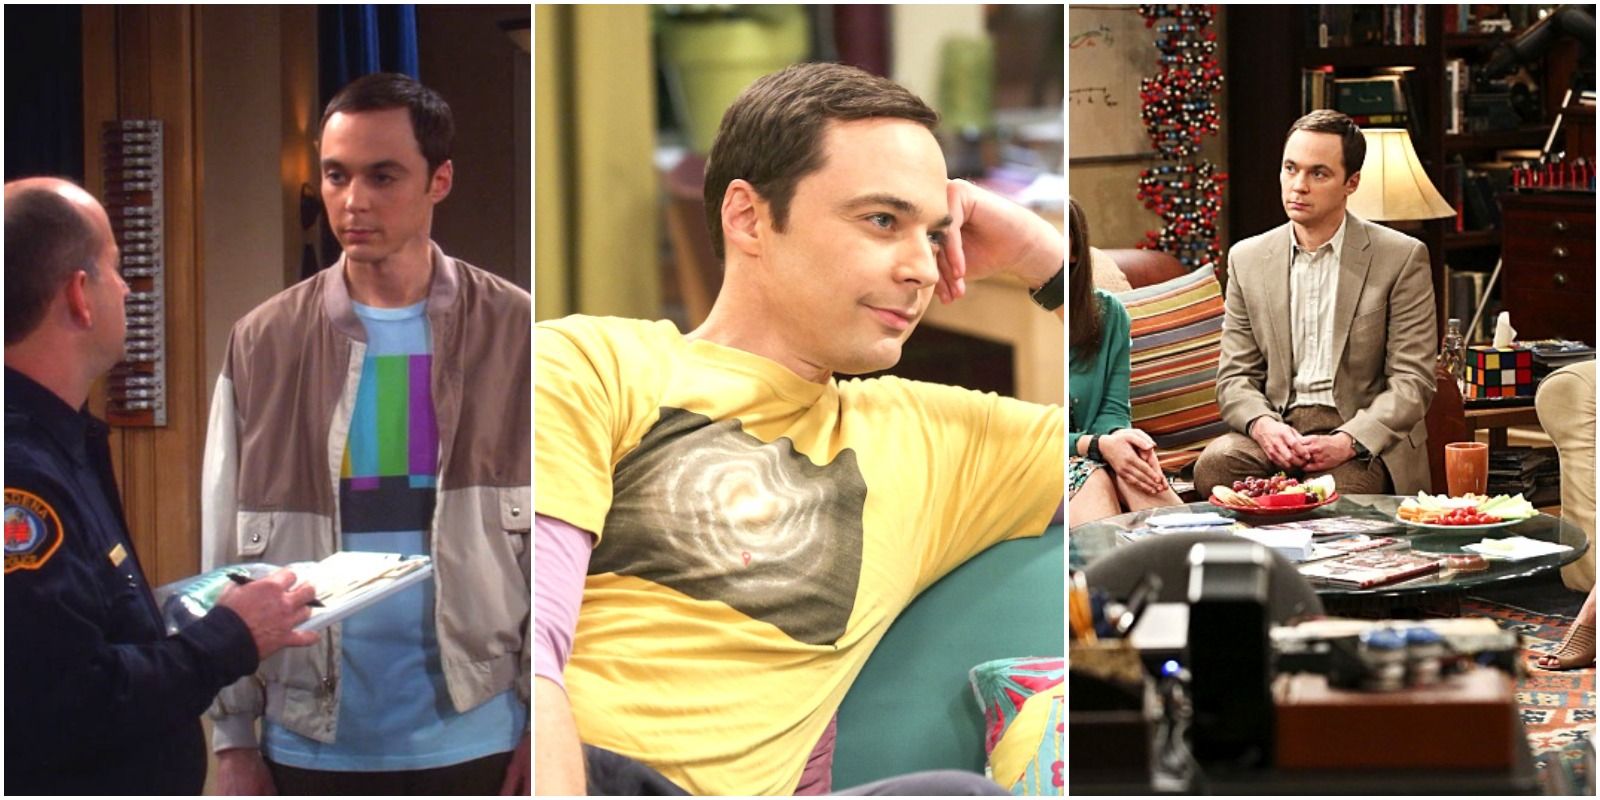 Sheldon talking to others and telling them he's not insane